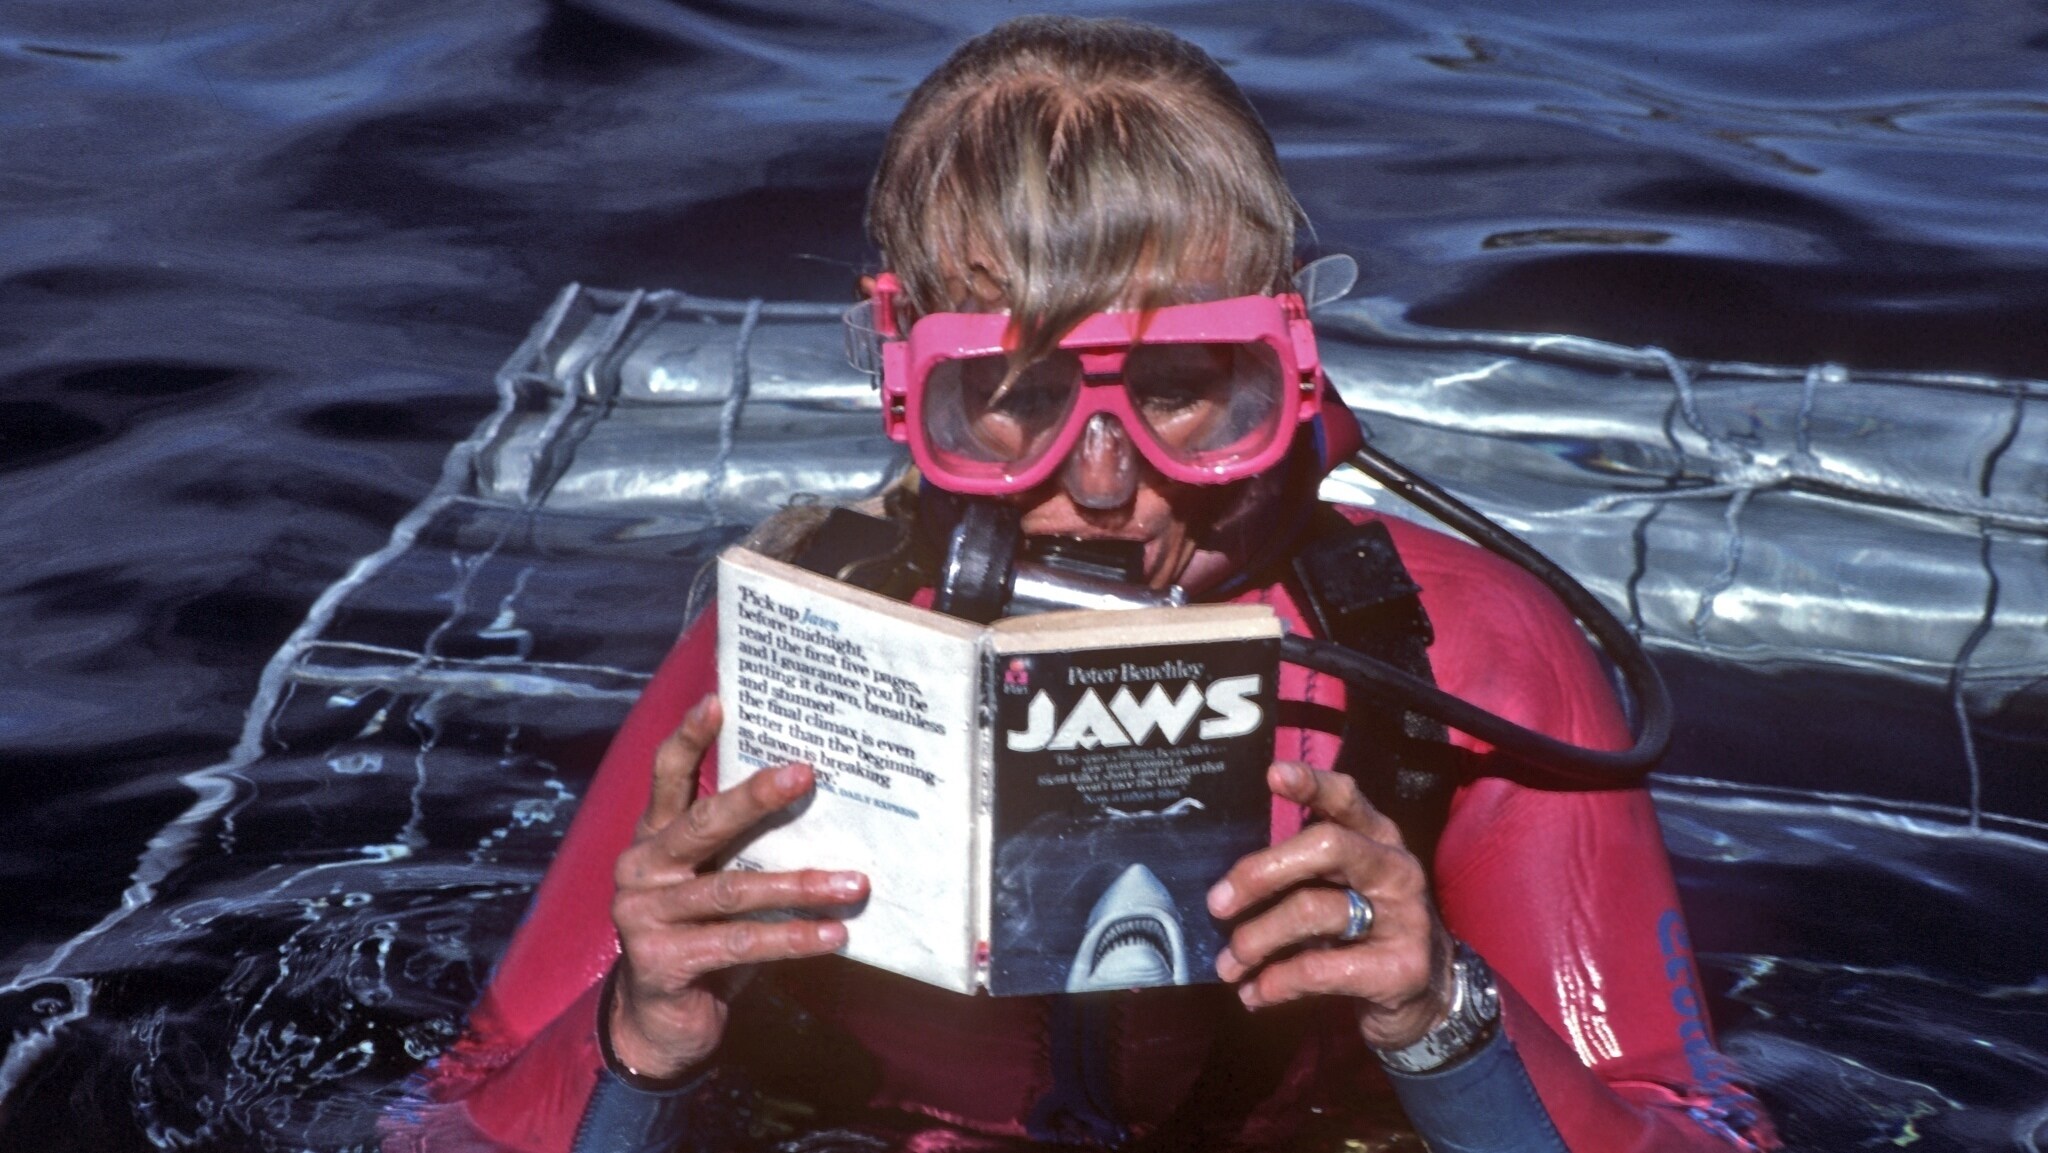 Valerie Taylor in scuba gear reading the Jaws book on top a shark cage in 1982.  (photo credit: Ron & Valerie Taylor)